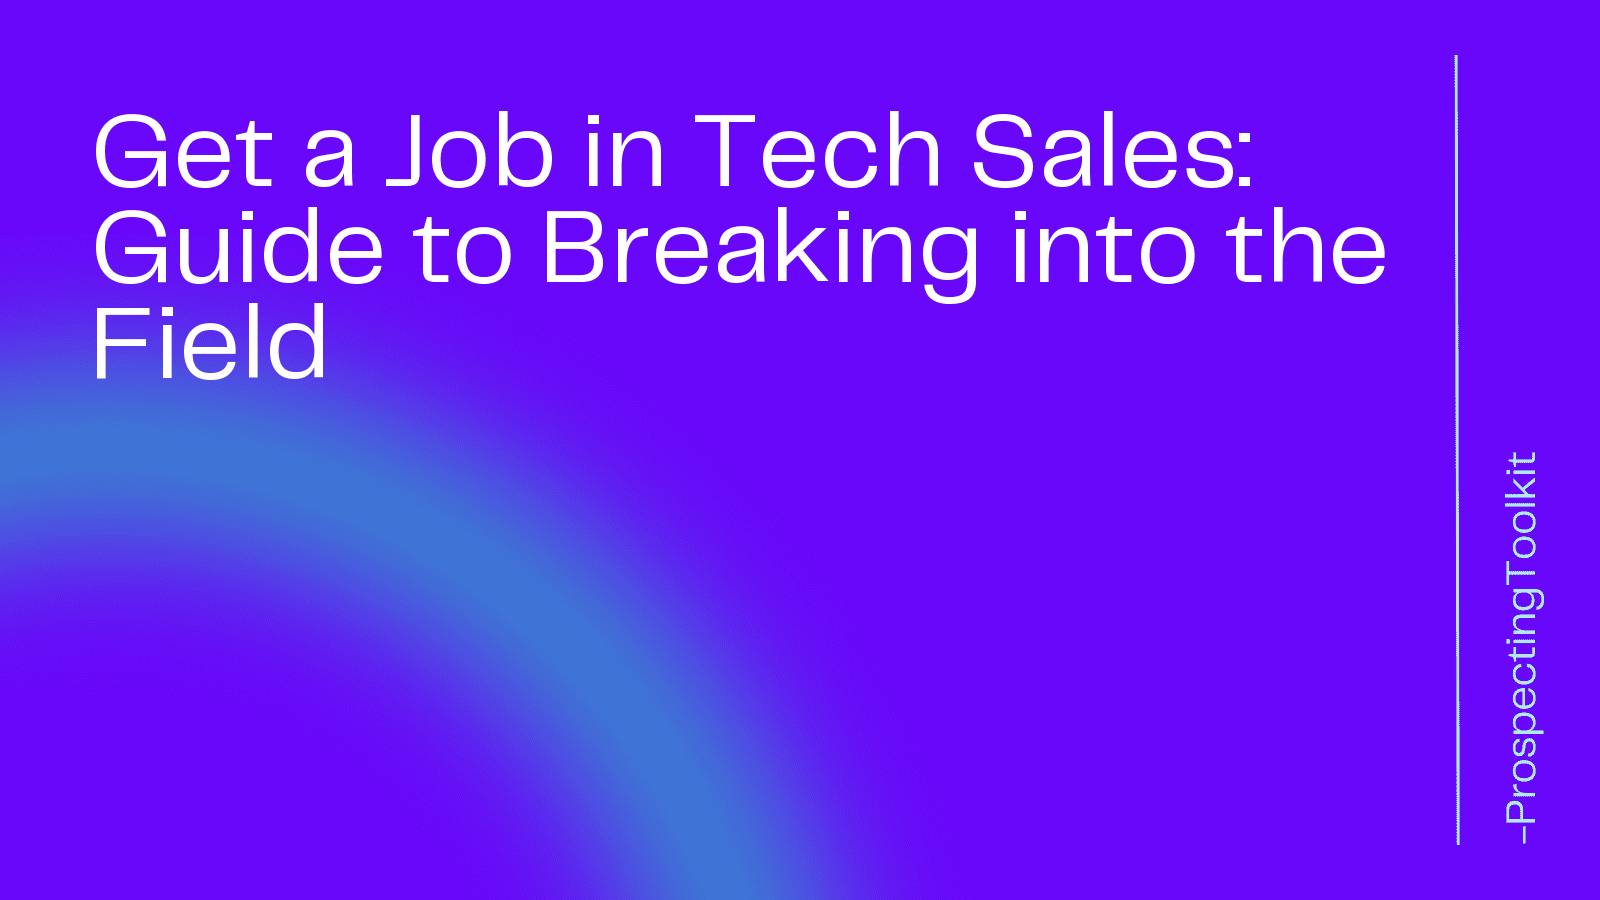 Get a Job in Tech Sales: Guide to Breaking into the Field